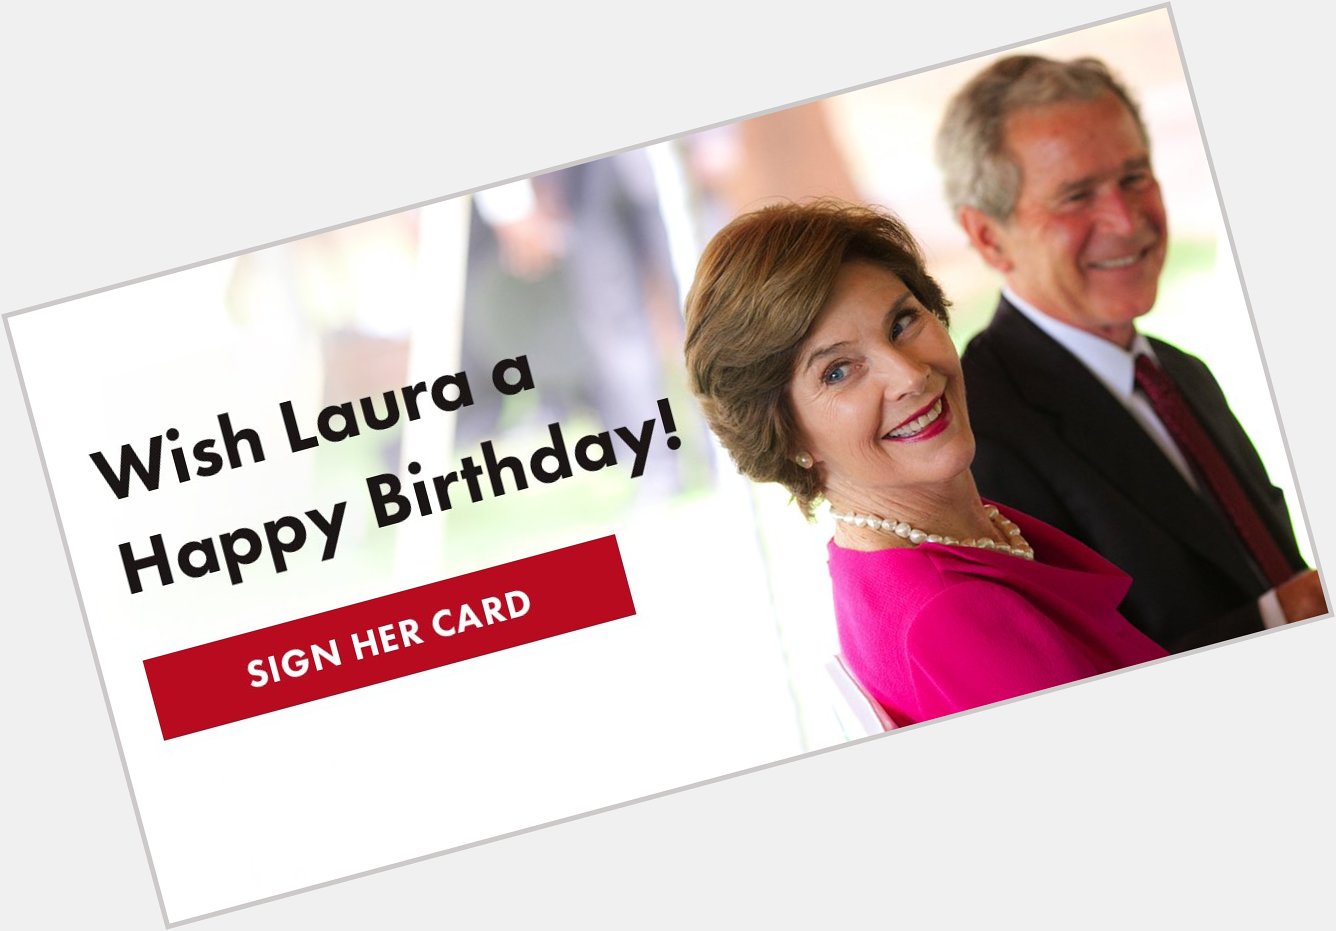 Today is former First Lady birthday. Sign her card:  